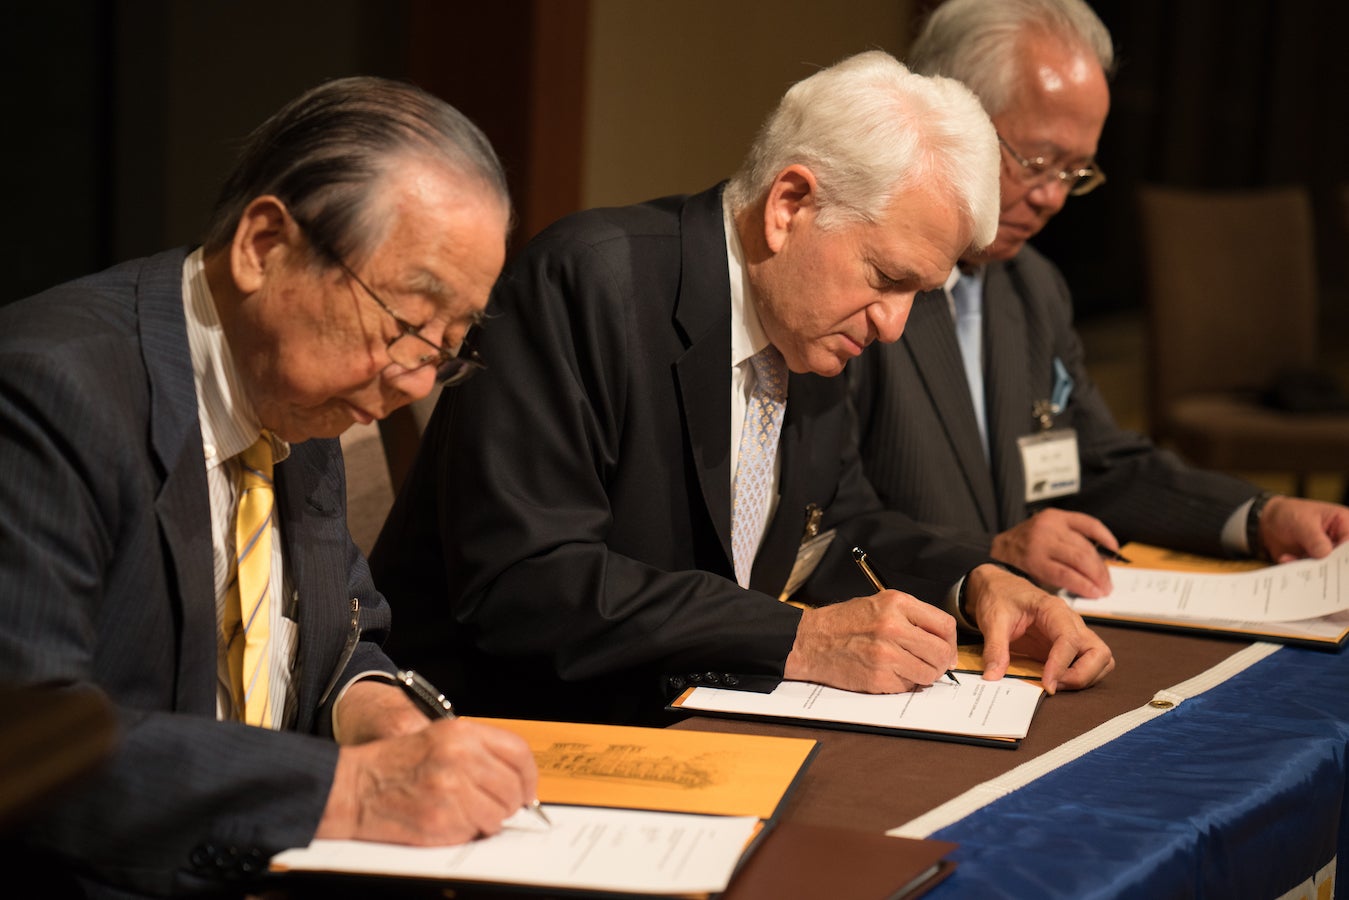 Chancellor Block (center) at table signing papers opening of the UCLA Japan Center in Tokyo, flanked by Masaru Murai (left) and Tomohiro Tohyama (right), in June 2016